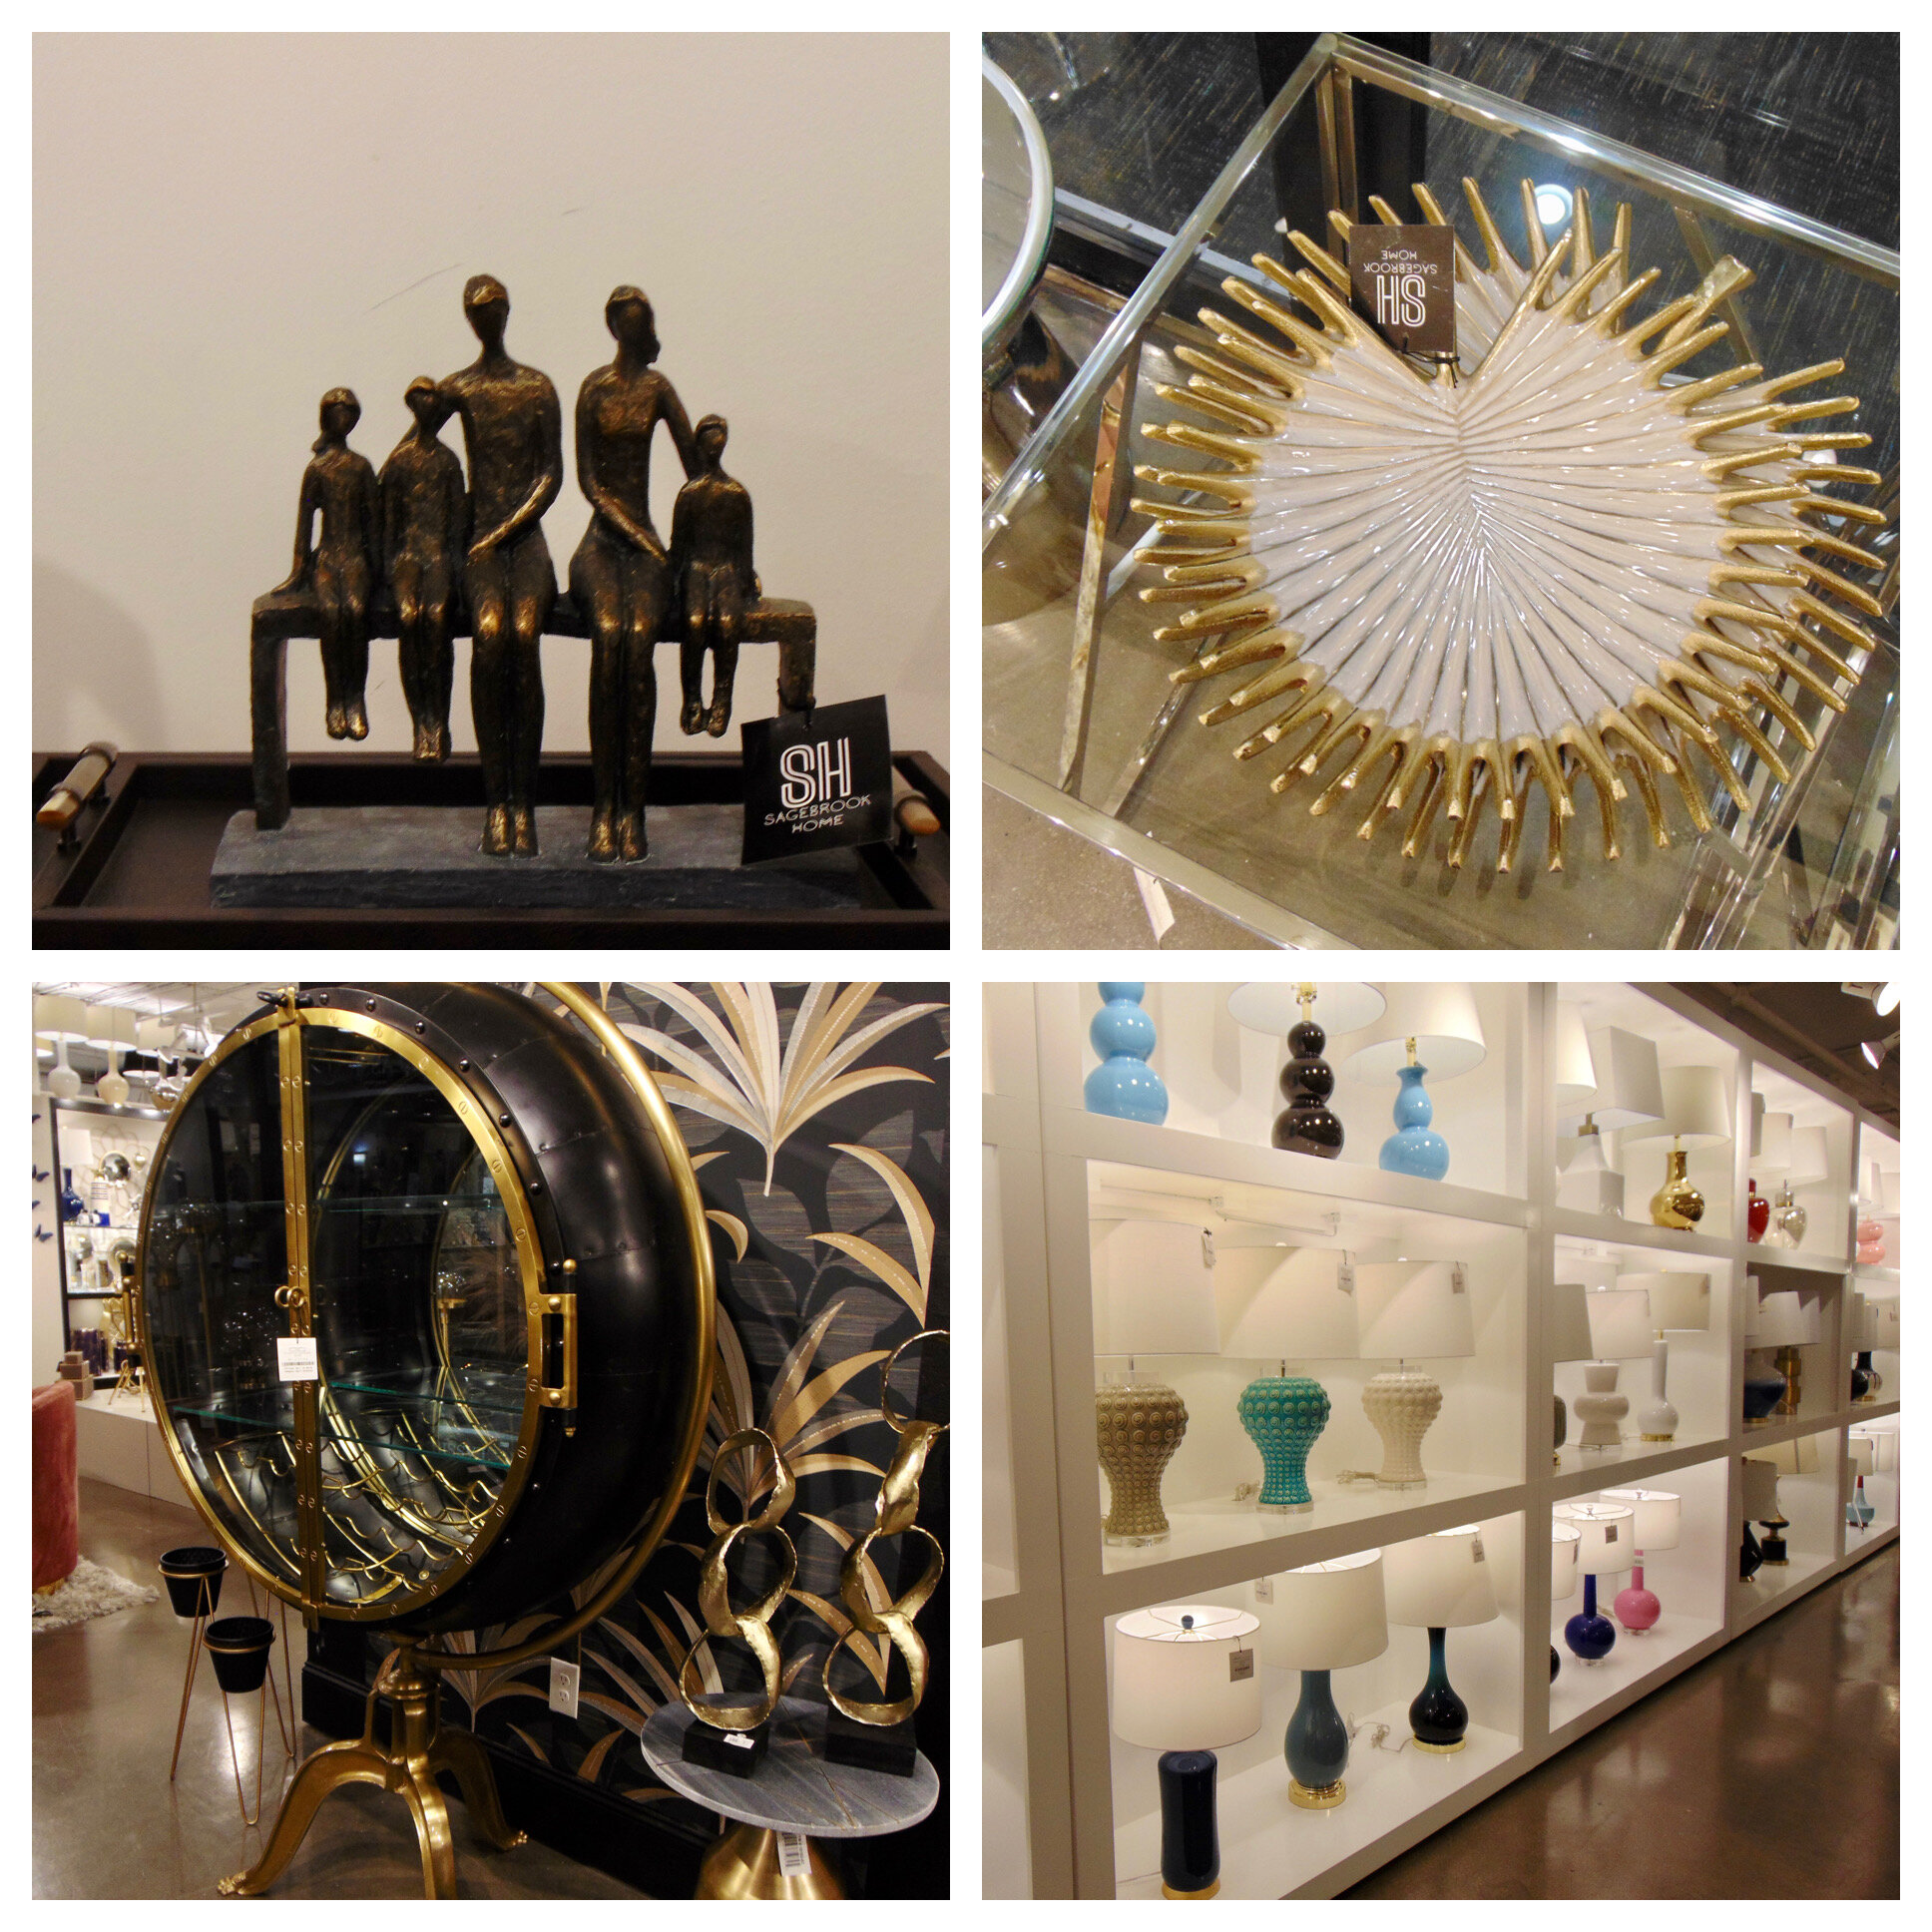 Clockwise, from top left. Summer intros and best-sellers at Sagebrook Home include family-themed metal sculptures and figurines, decorative metal leaf trays, Sagebrook’s “wall of lamps,” and Nautical metal and glass bar cabinet, 78” high - 